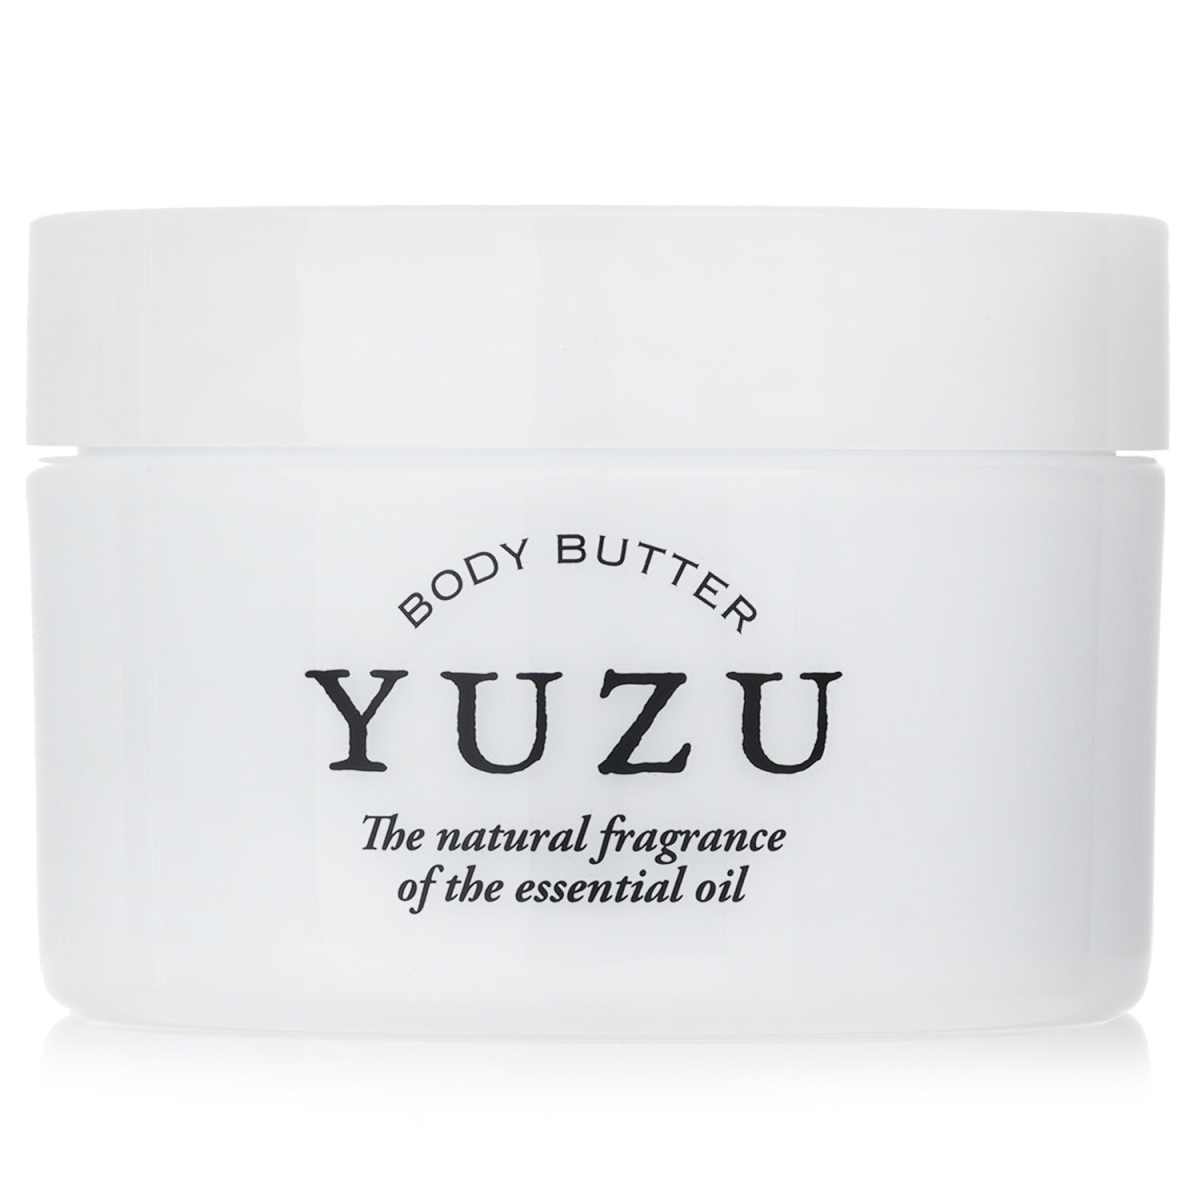 Picture of Daily Aroma Japan 304283 120 g Yuzu Body Butter